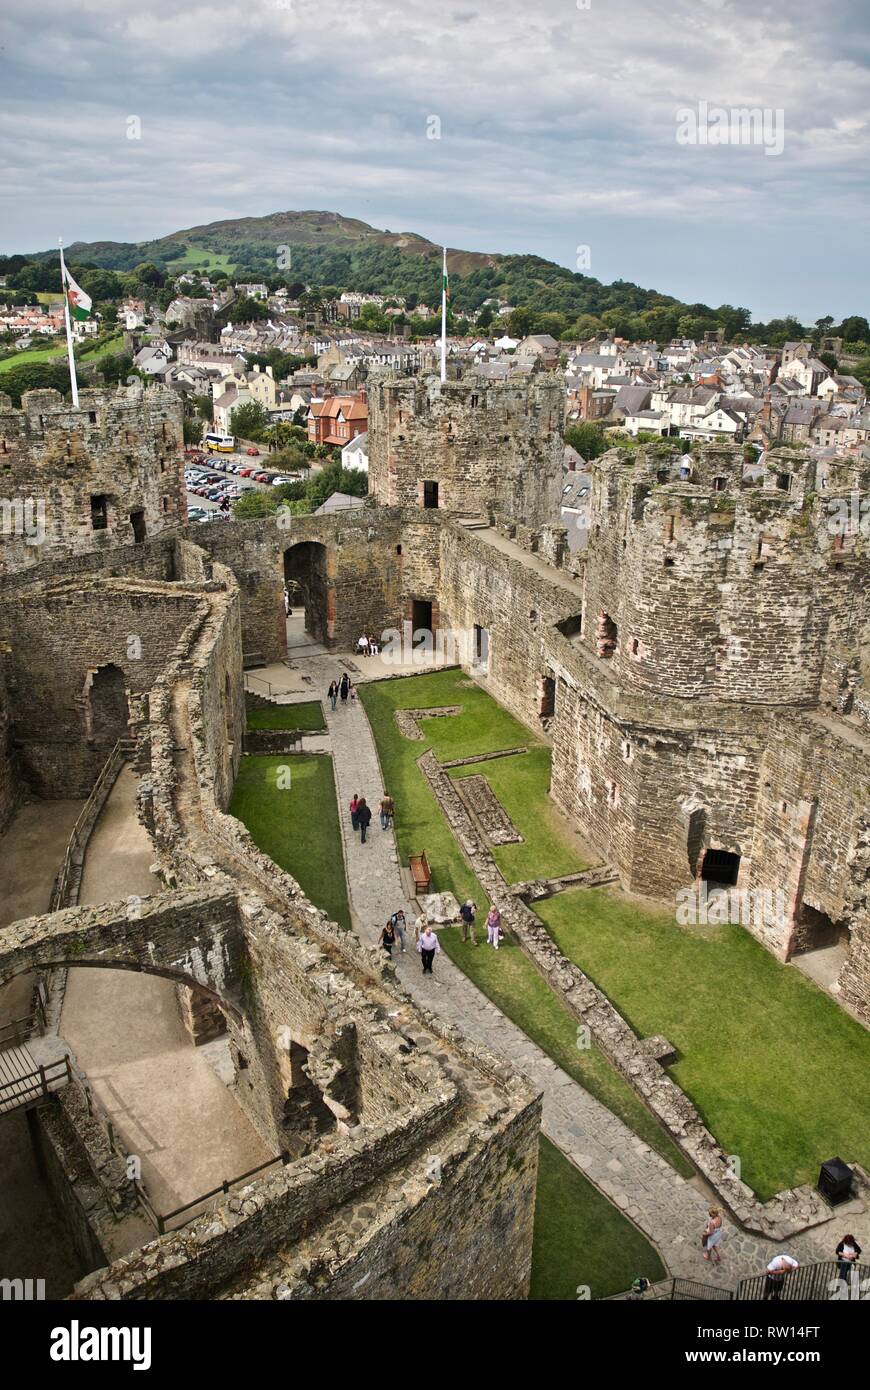 A view from a tower down onto the inside of Conwy Castle, Conwy, North Wales, UK Stock Photo